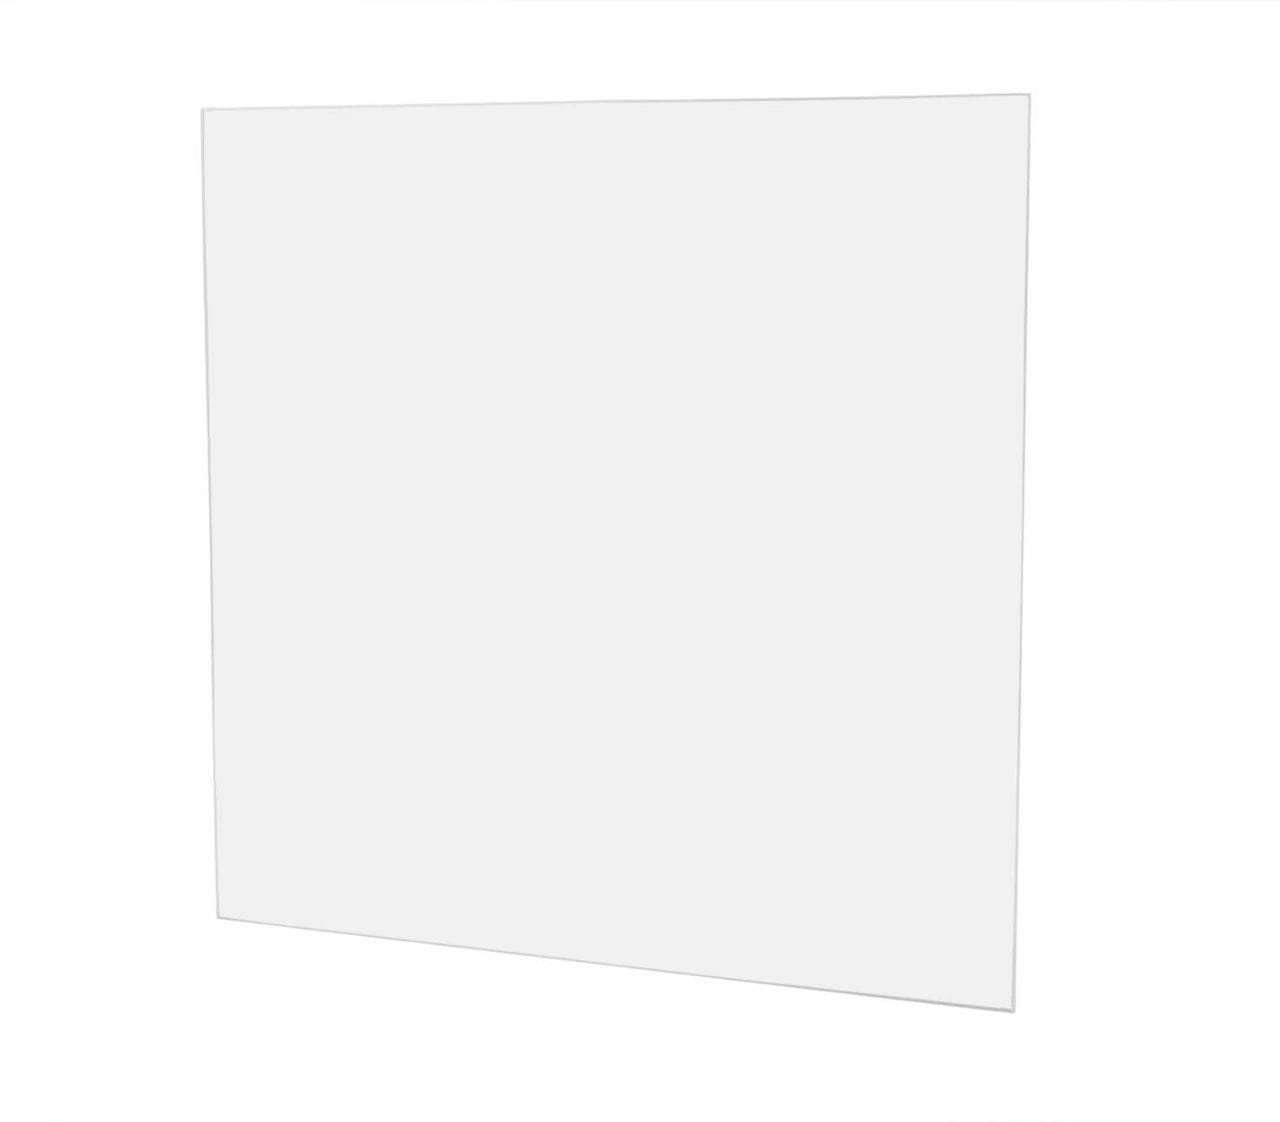 Square Sheets up to 12 Clear 1/8” Thick .118 or 3MM DIY Crafts